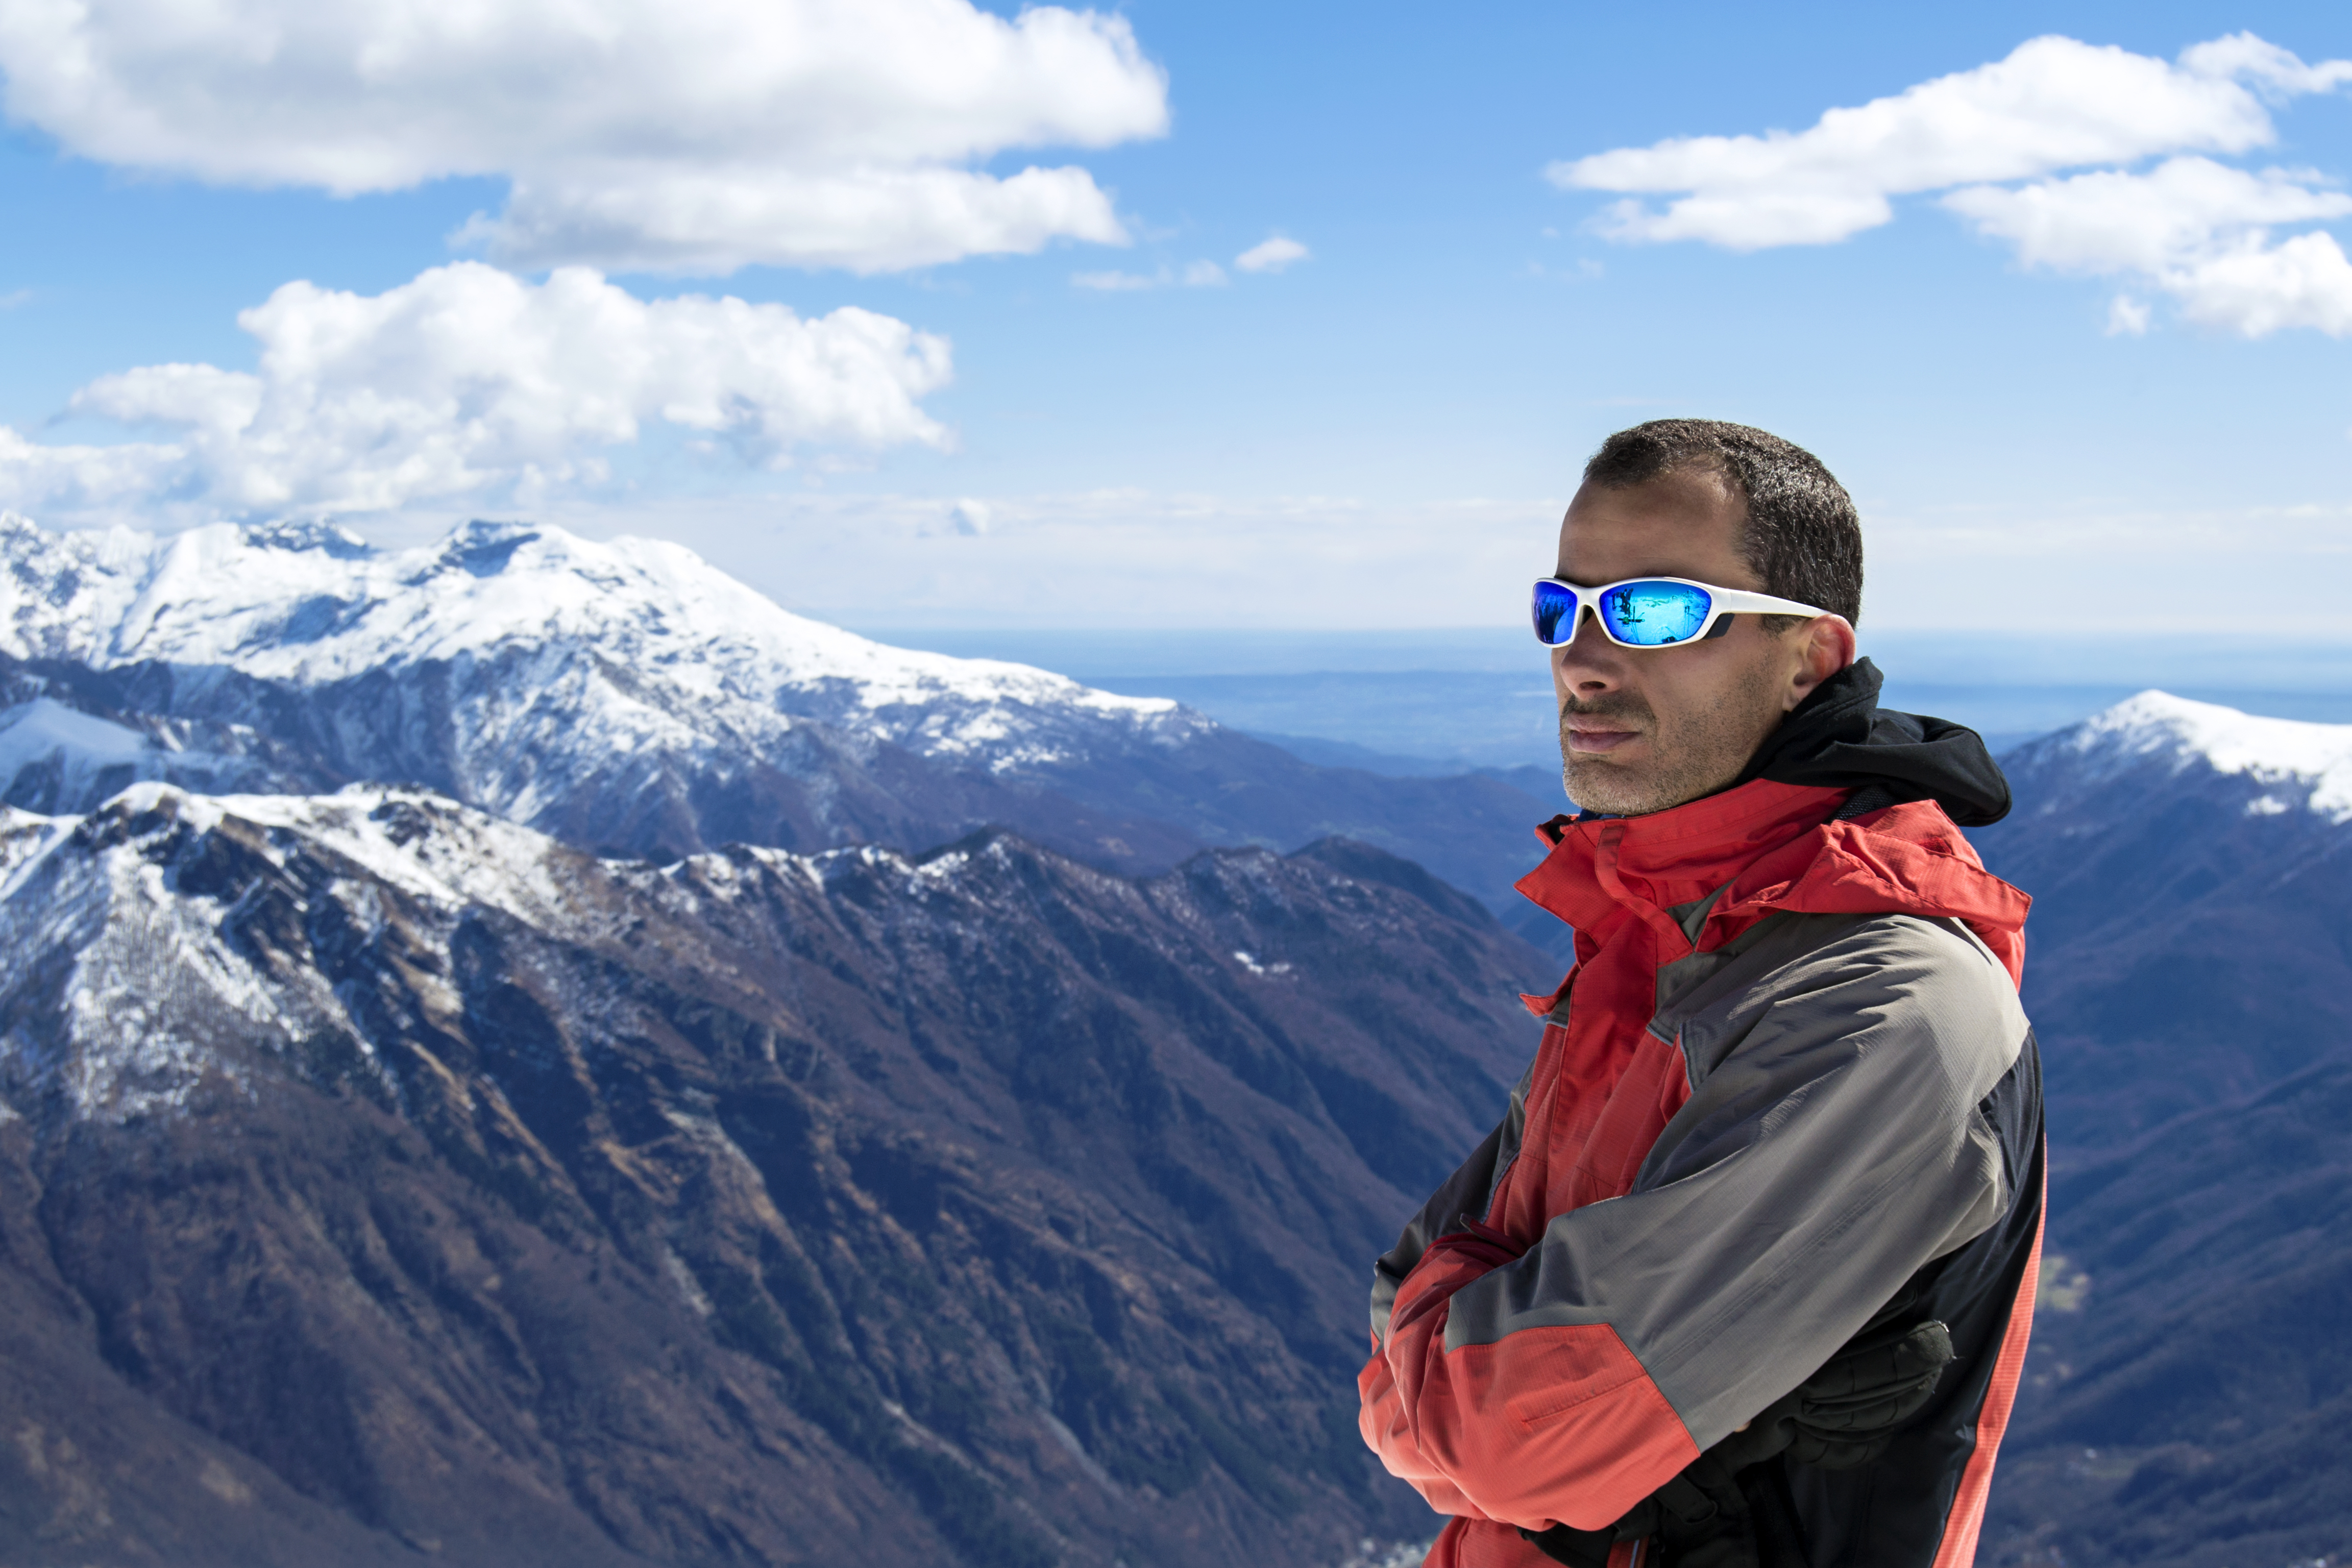 Man standing on top of a mountain wearing sunglasses